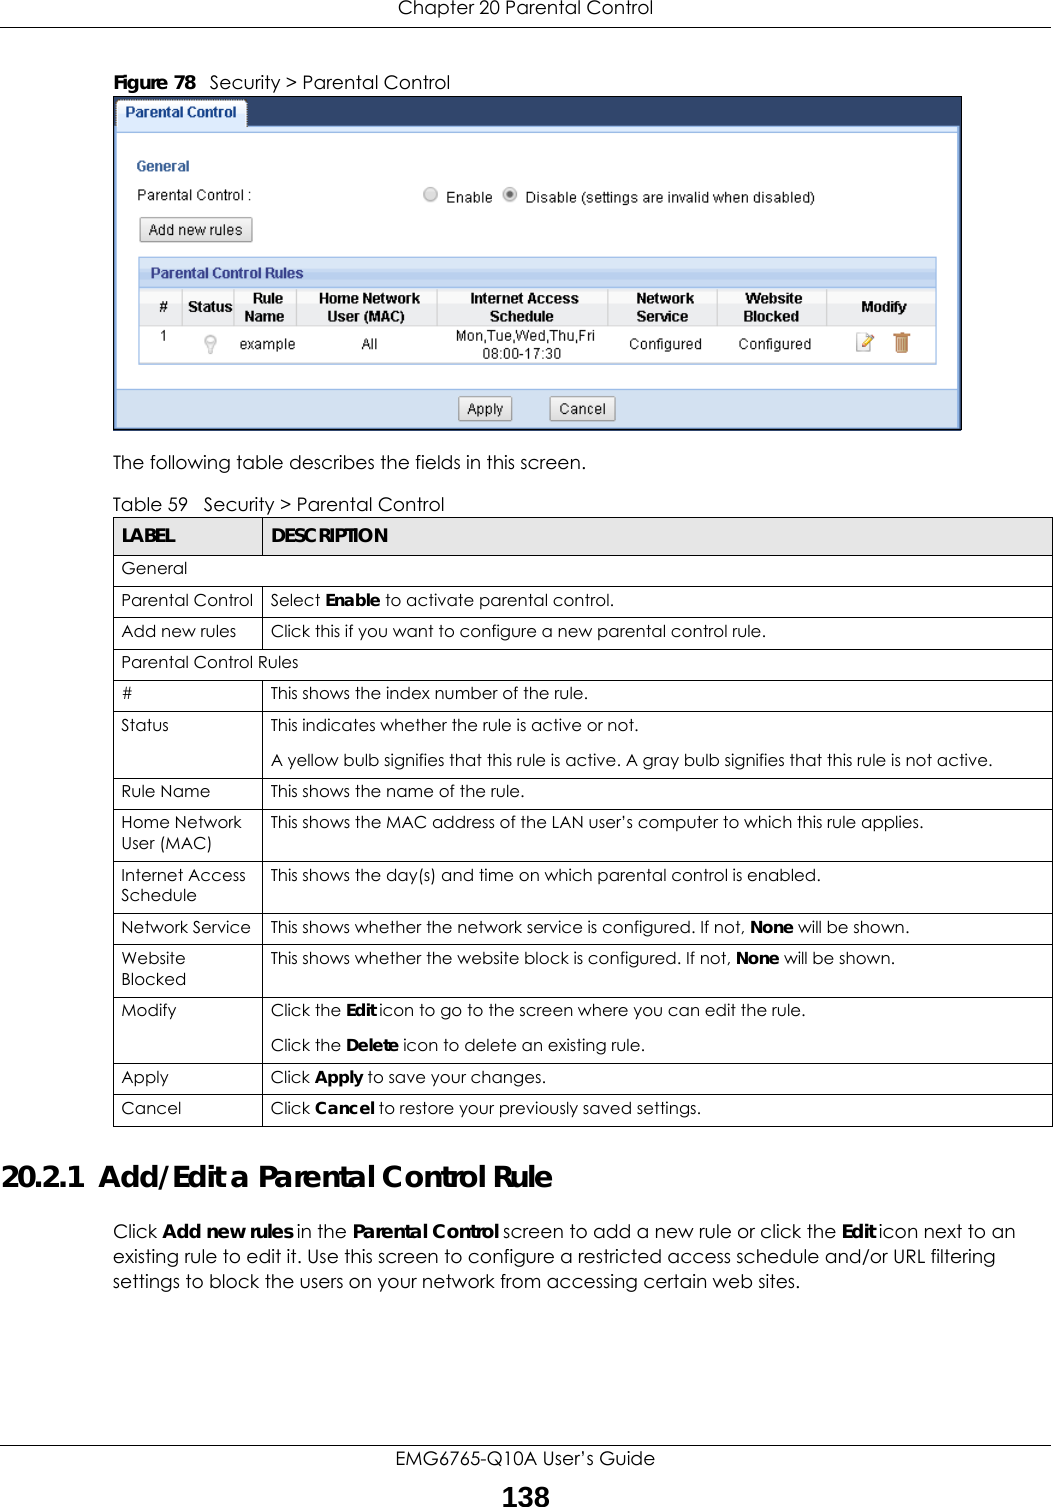 Chapter 20 Parental ControlEMG6765-Q10A User’s Guide138Figure 78   Security &gt; Parental Control The following table describes the fields in this screen. 20.2.1  Add/Edit a Parental Control RuleClick Add new rules in the Parental Control screen to add a new rule or click the Edit icon next to an existing rule to edit it. Use this screen to configure a restricted access schedule and/or URL filtering settings to block the users on your network from accessing certain web sites.Table 59   Security &gt; Parental ControlLABEL DESCRIPTIONGeneralParental Control Select Enable to activate parental control.Add new rules Click this if you want to configure a new parental control rule.Parental Control Rules#This shows the index number of the rule.Status This indicates whether the rule is active or not.A yellow bulb signifies that this rule is active. A gray bulb signifies that this rule is not active.Rule Name This shows the name of the rule.Home Network User (MAC)This shows the MAC address of the LAN user’s computer to which this rule applies.Internet Access ScheduleThis shows the day(s) and time on which parental control is enabled.Network Service This shows whether the network service is configured. If not, None will be shown.Website BlockedThis shows whether the website block is configured. If not, None will be shown.Modify Click the Edit icon to go to the screen where you can edit the rule.Click the Delete icon to delete an existing rule.Apply Click Apply to save your changes.Cancel Click Cancel to restore your previously saved settings.